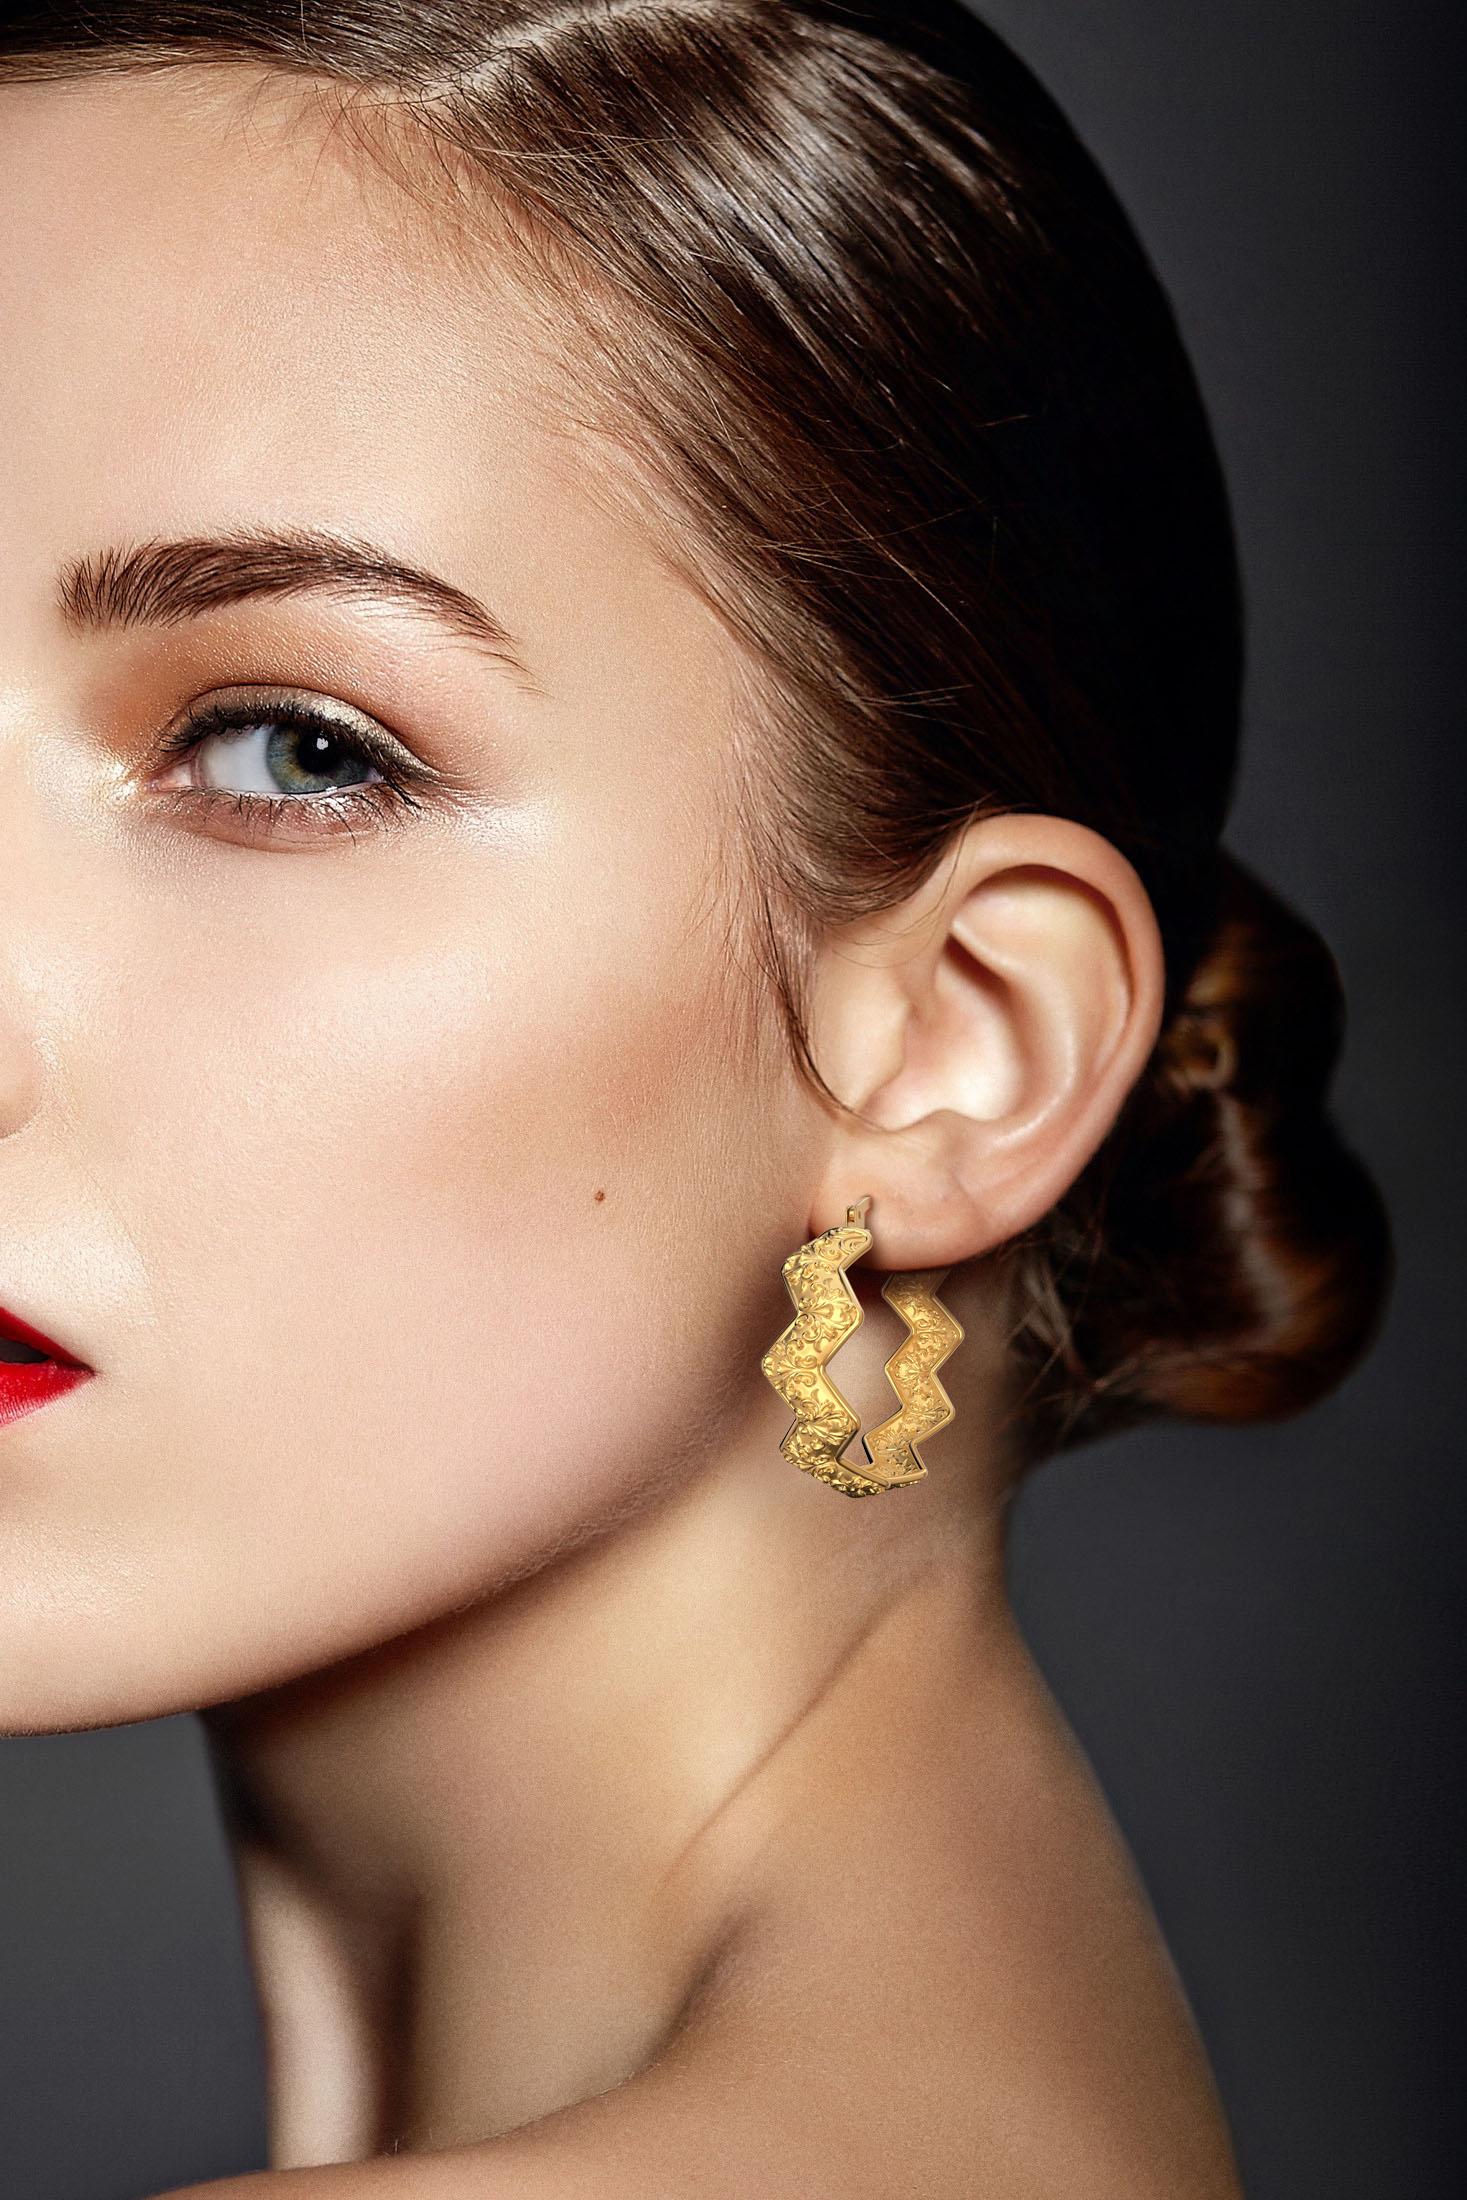 Contemporary Hoop Earrings in 14k Gold Made in Italy by Oltremare Gioielli, Baroque Earrings For Sale